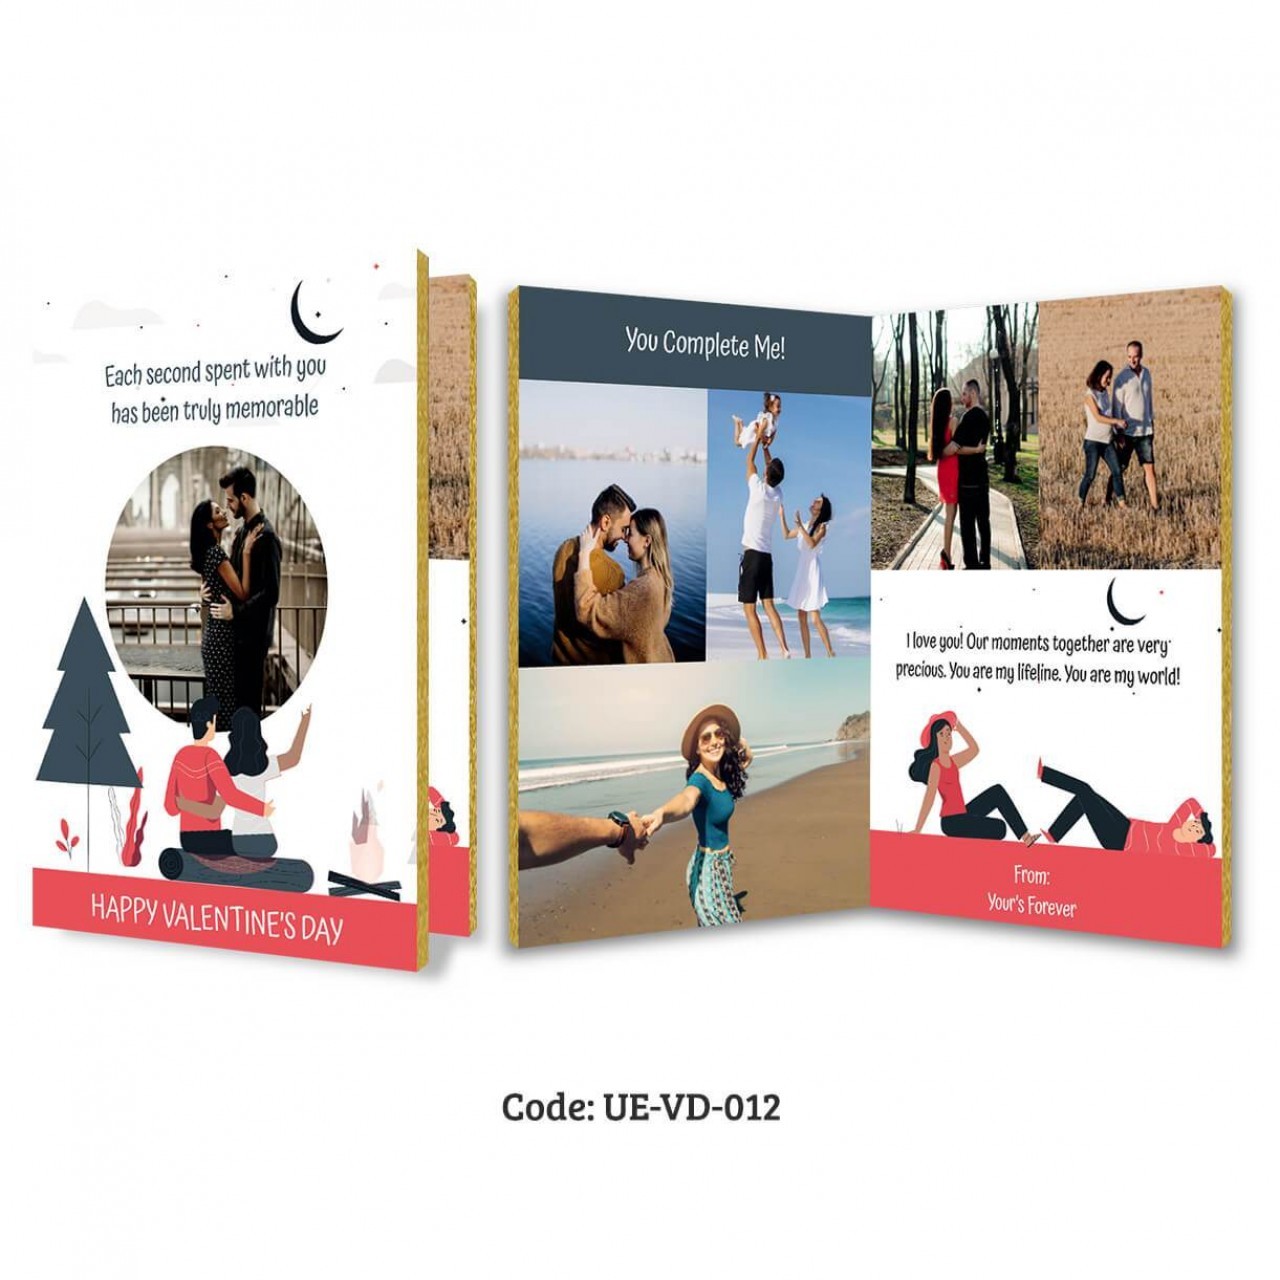 Personalized Voice Audio Greeting Card